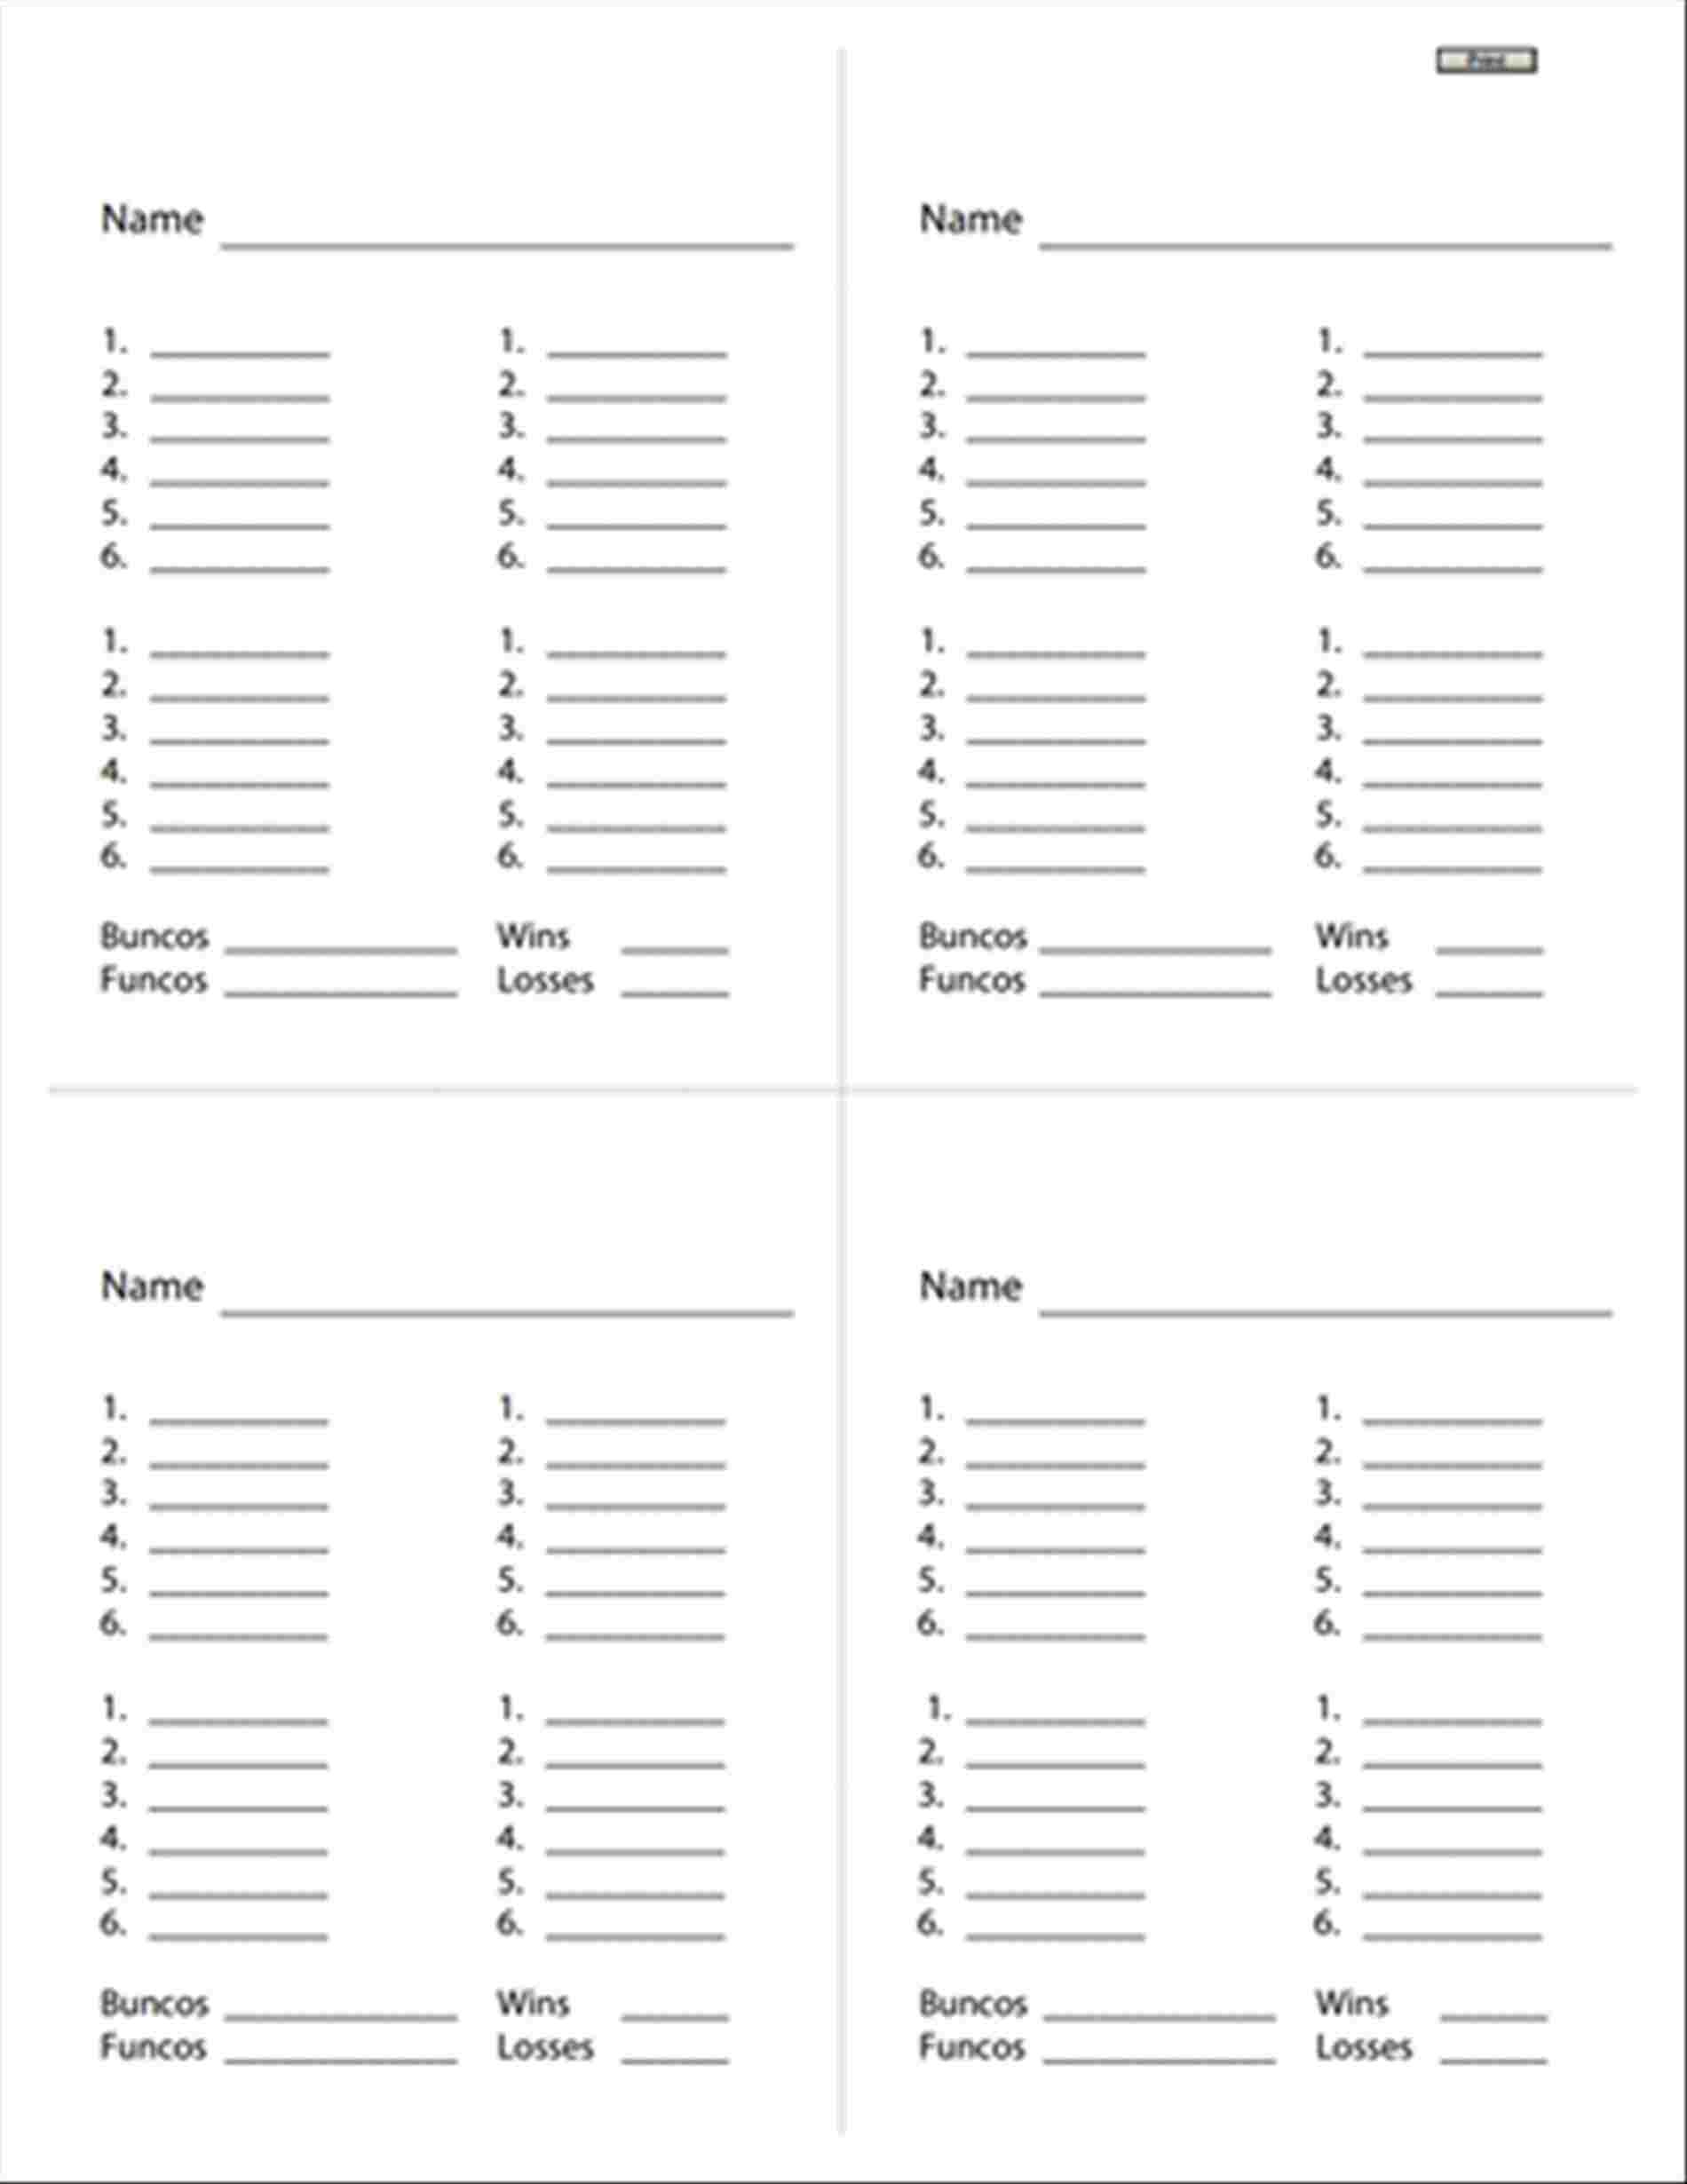 Free Printable Bunco Score Sheets (79+ Images In Collection) Page 1 - Free Printable Bunco Game Sheets